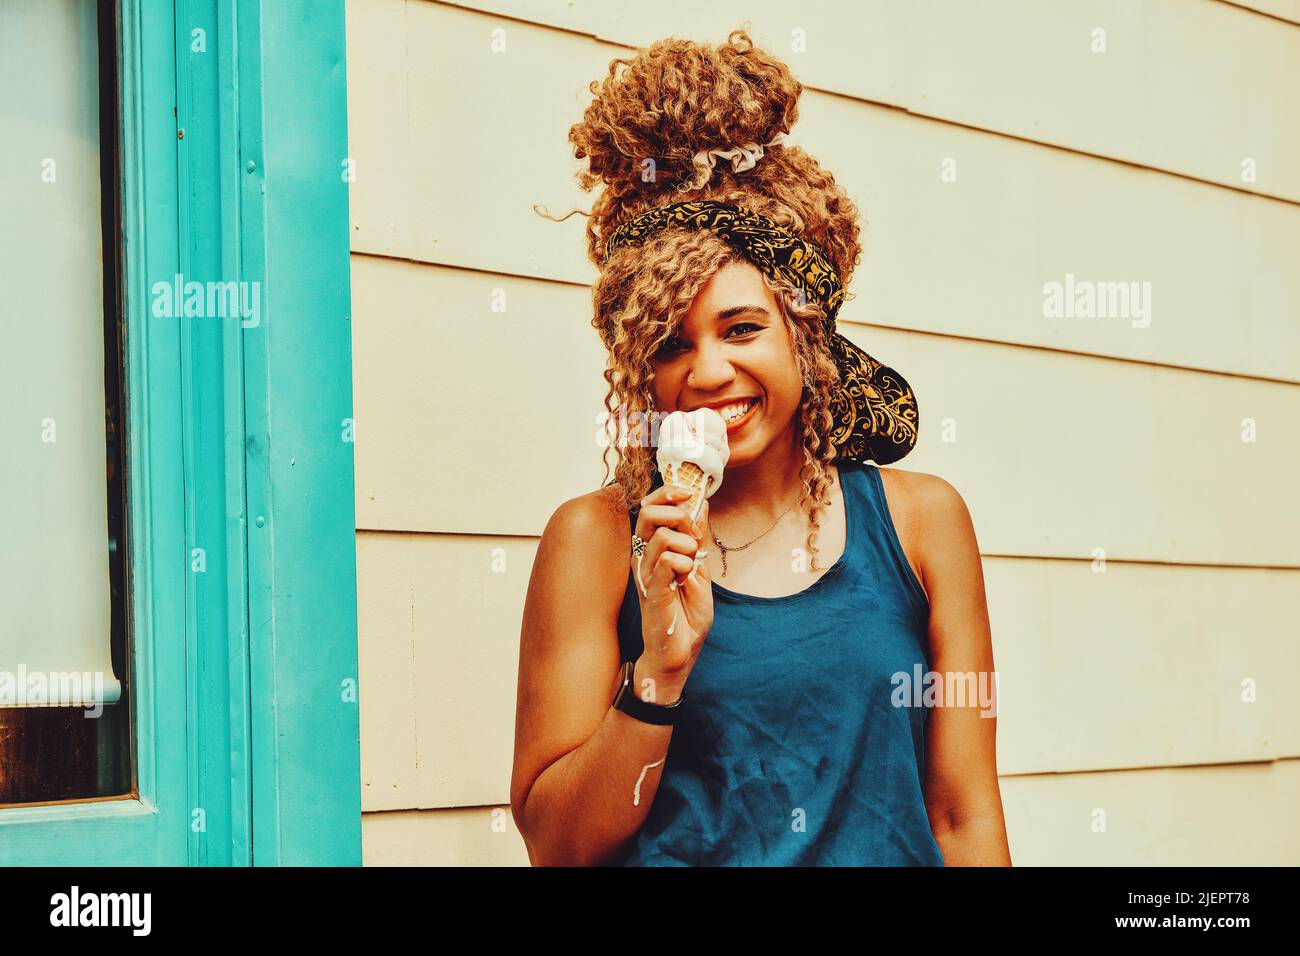 young adult woman afro hair smiling eating ice cream outdoors summertime shot Stock Photo